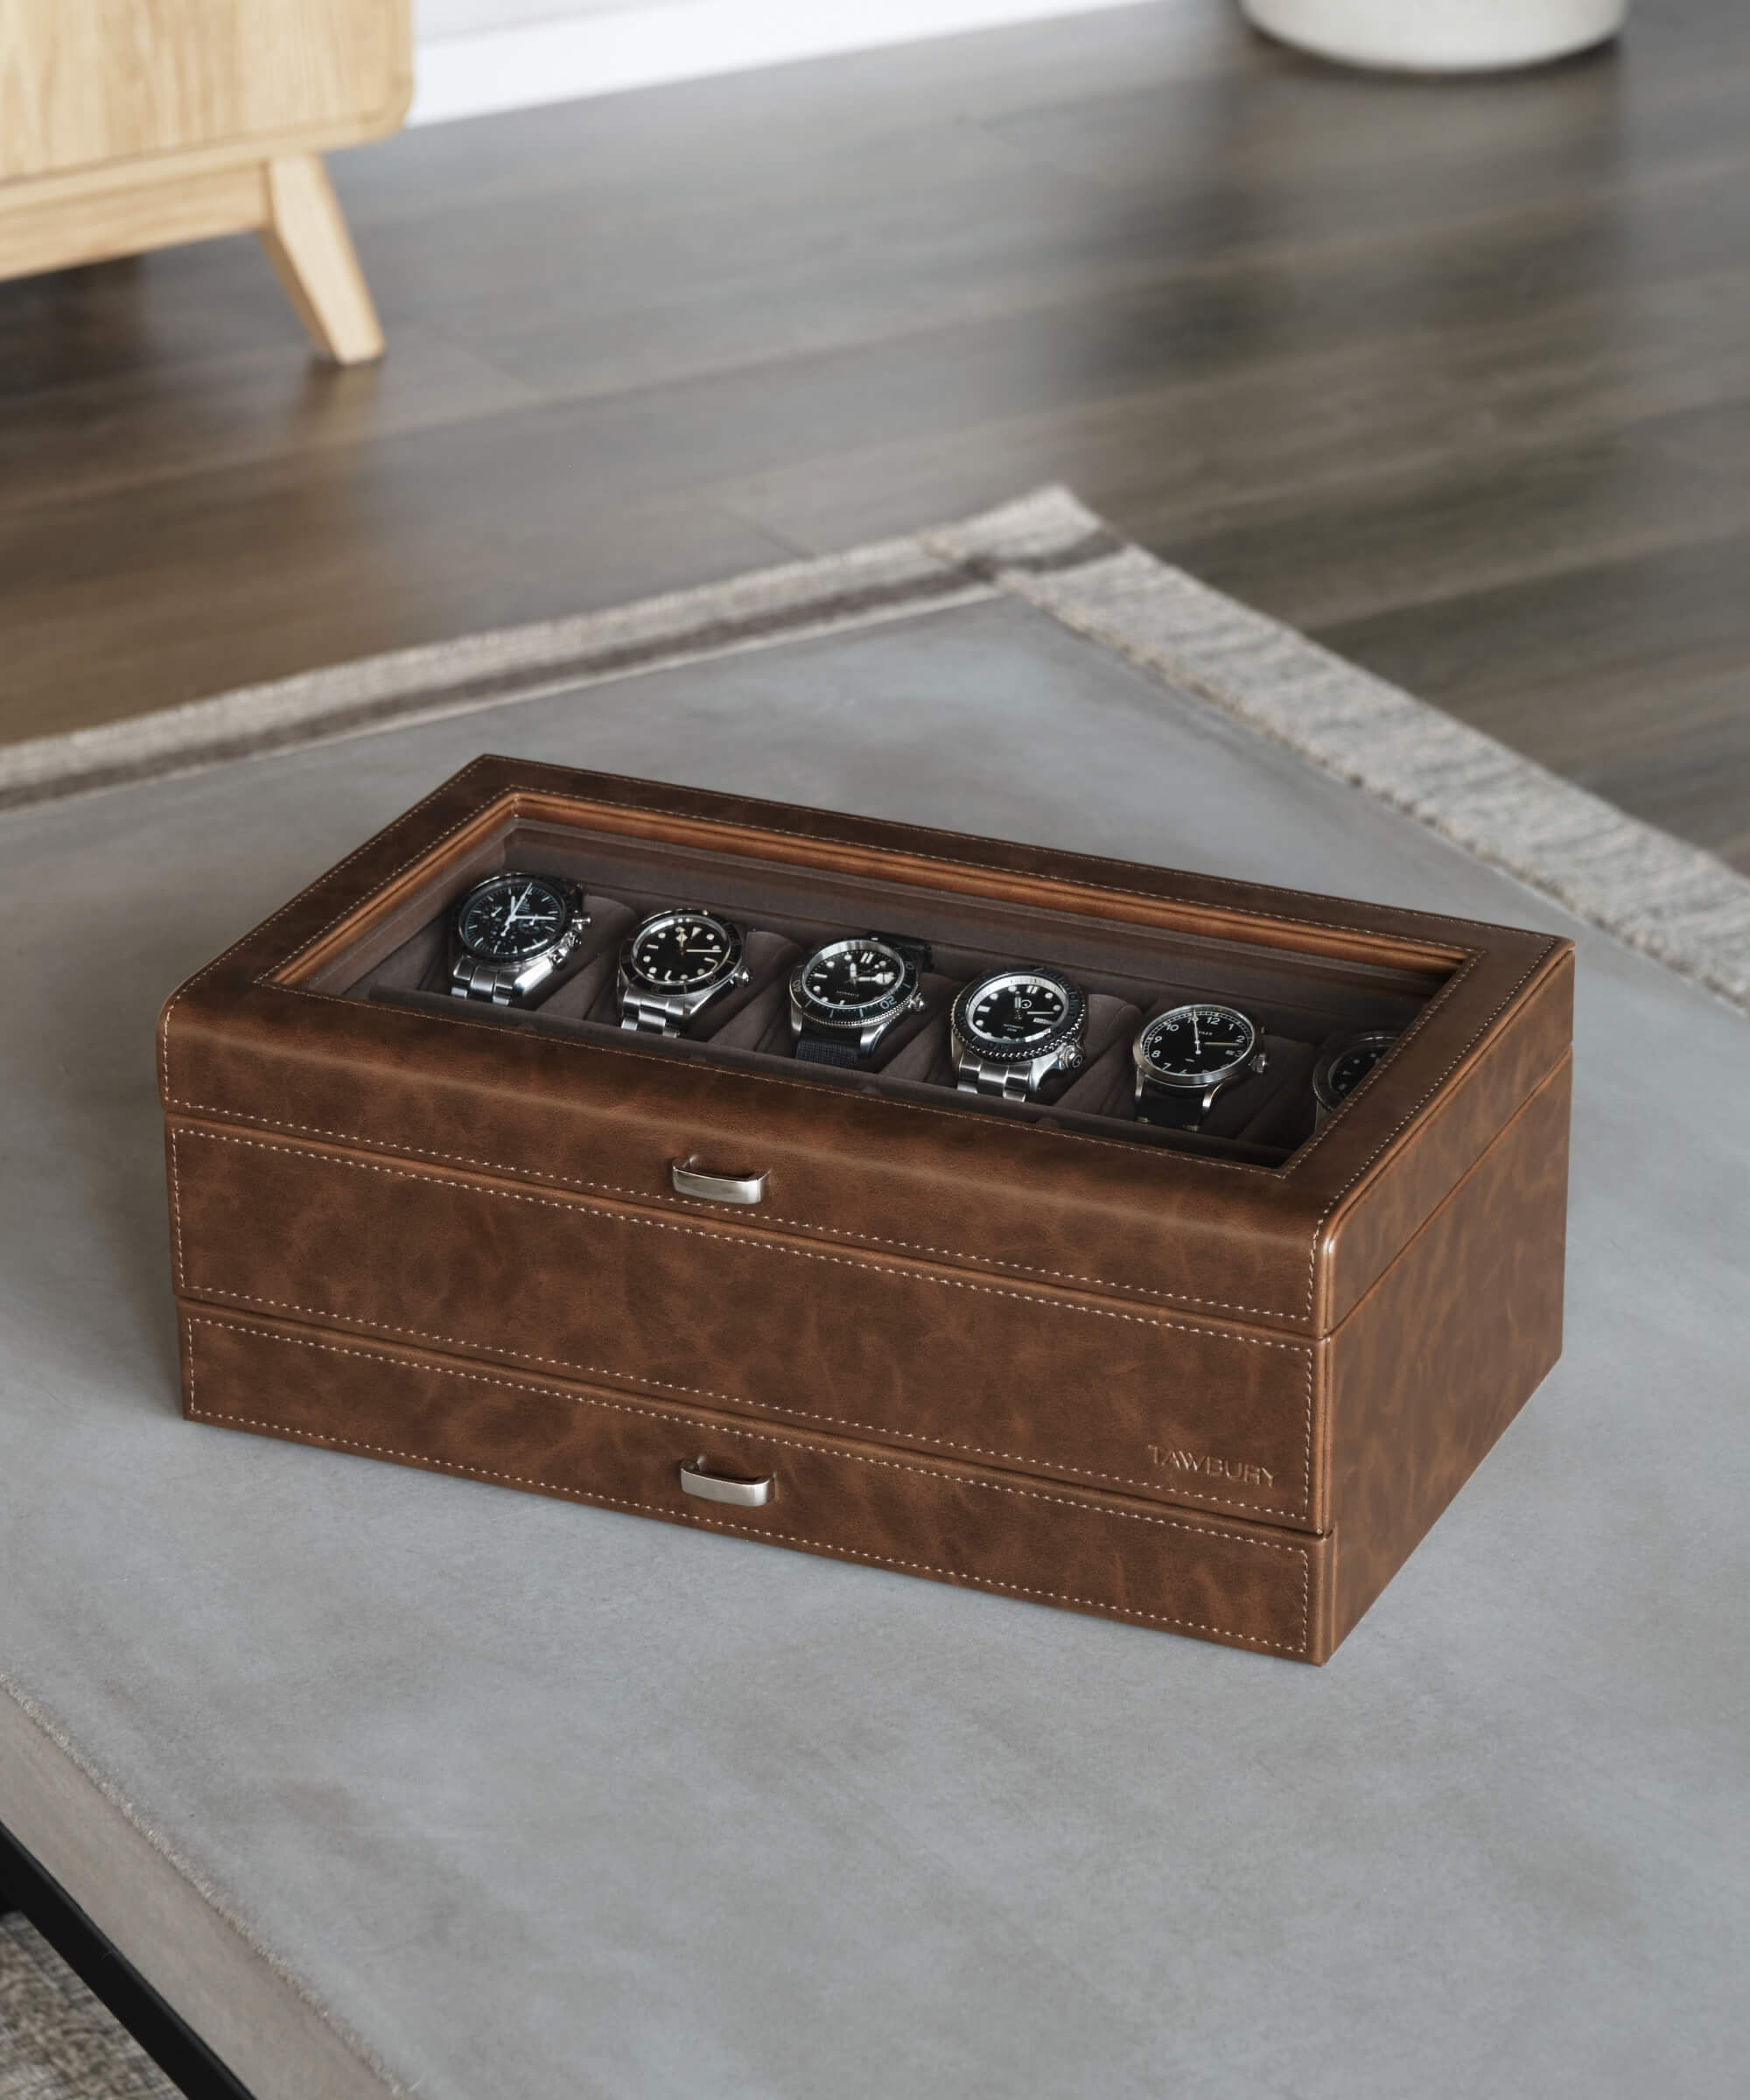 A TAWBURY Bayswater 12 Slot Watch Box with Drawer - Brown, designed for timepieces, sitting on top of a table.